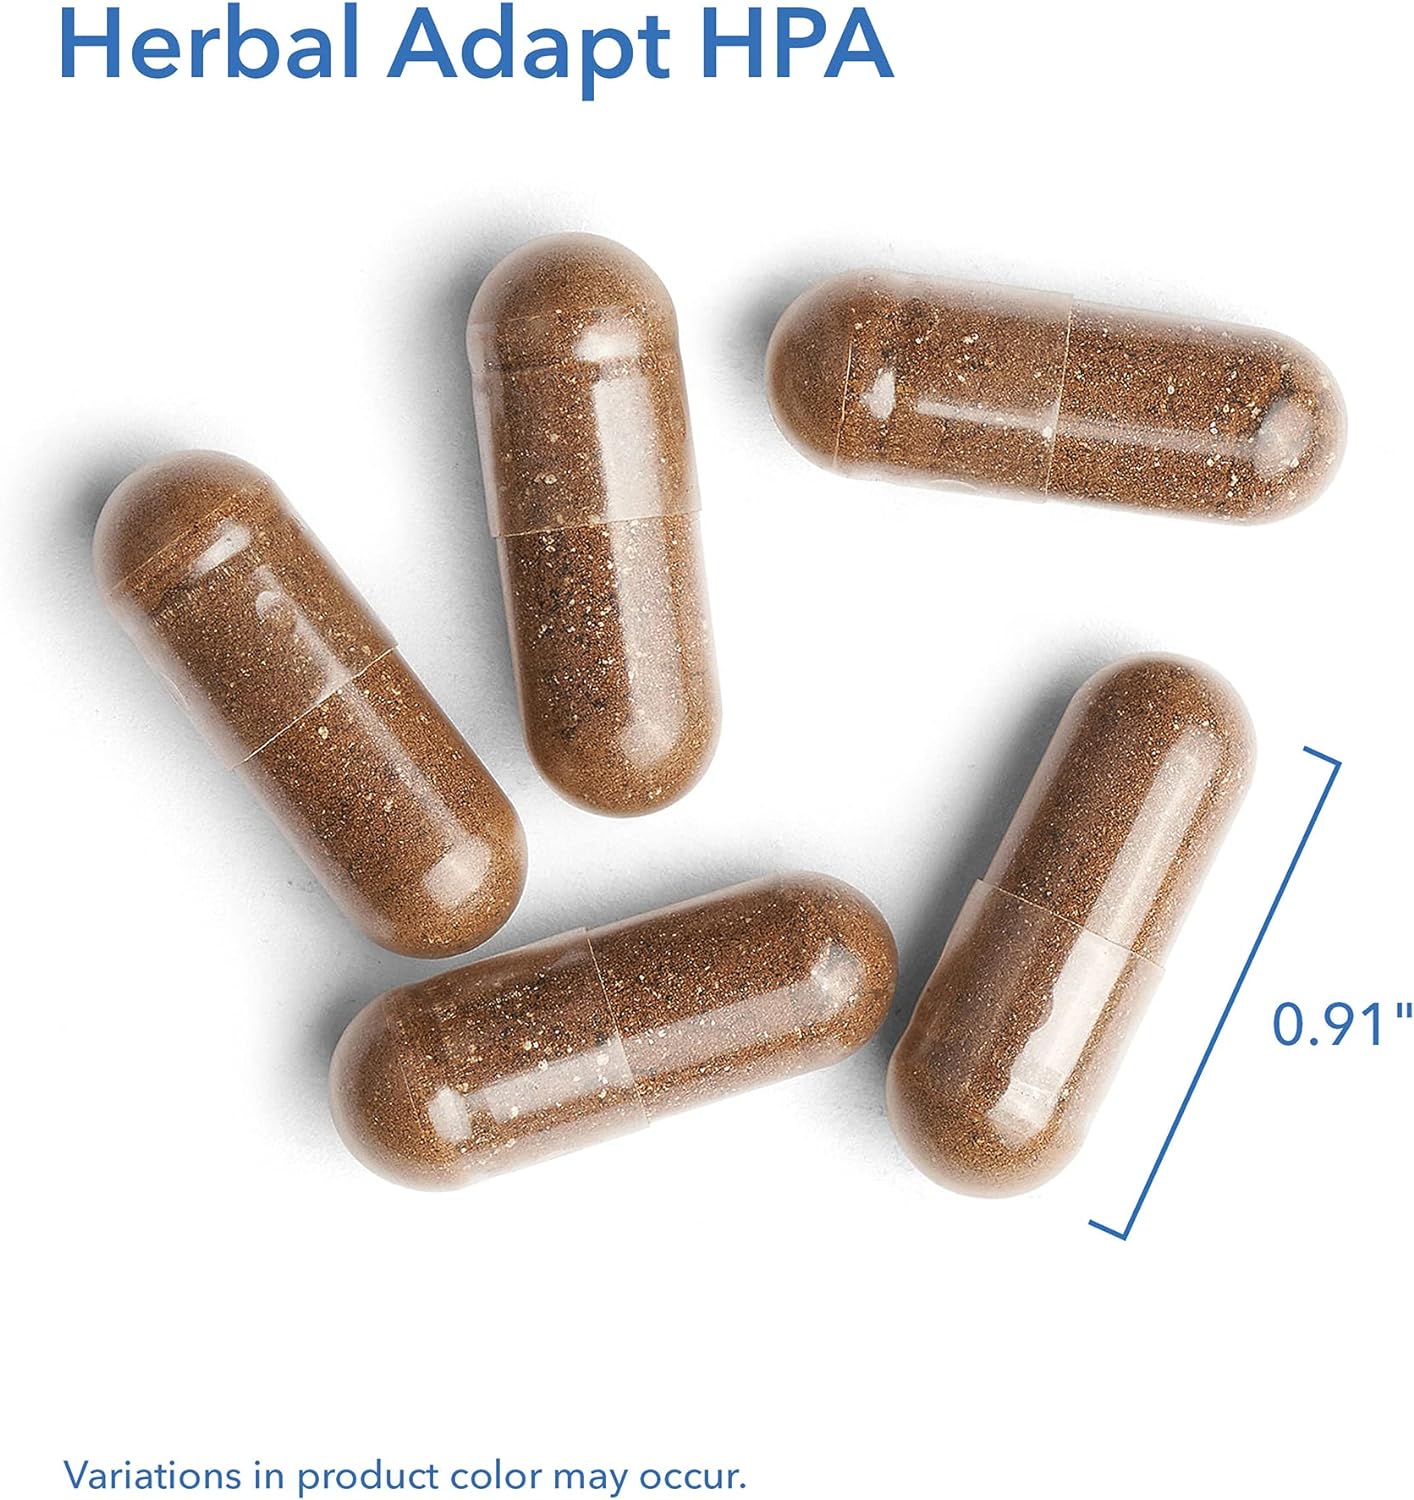 Allergy Research Group - Herbal Adapt - HPA Axis, Ashwagandh